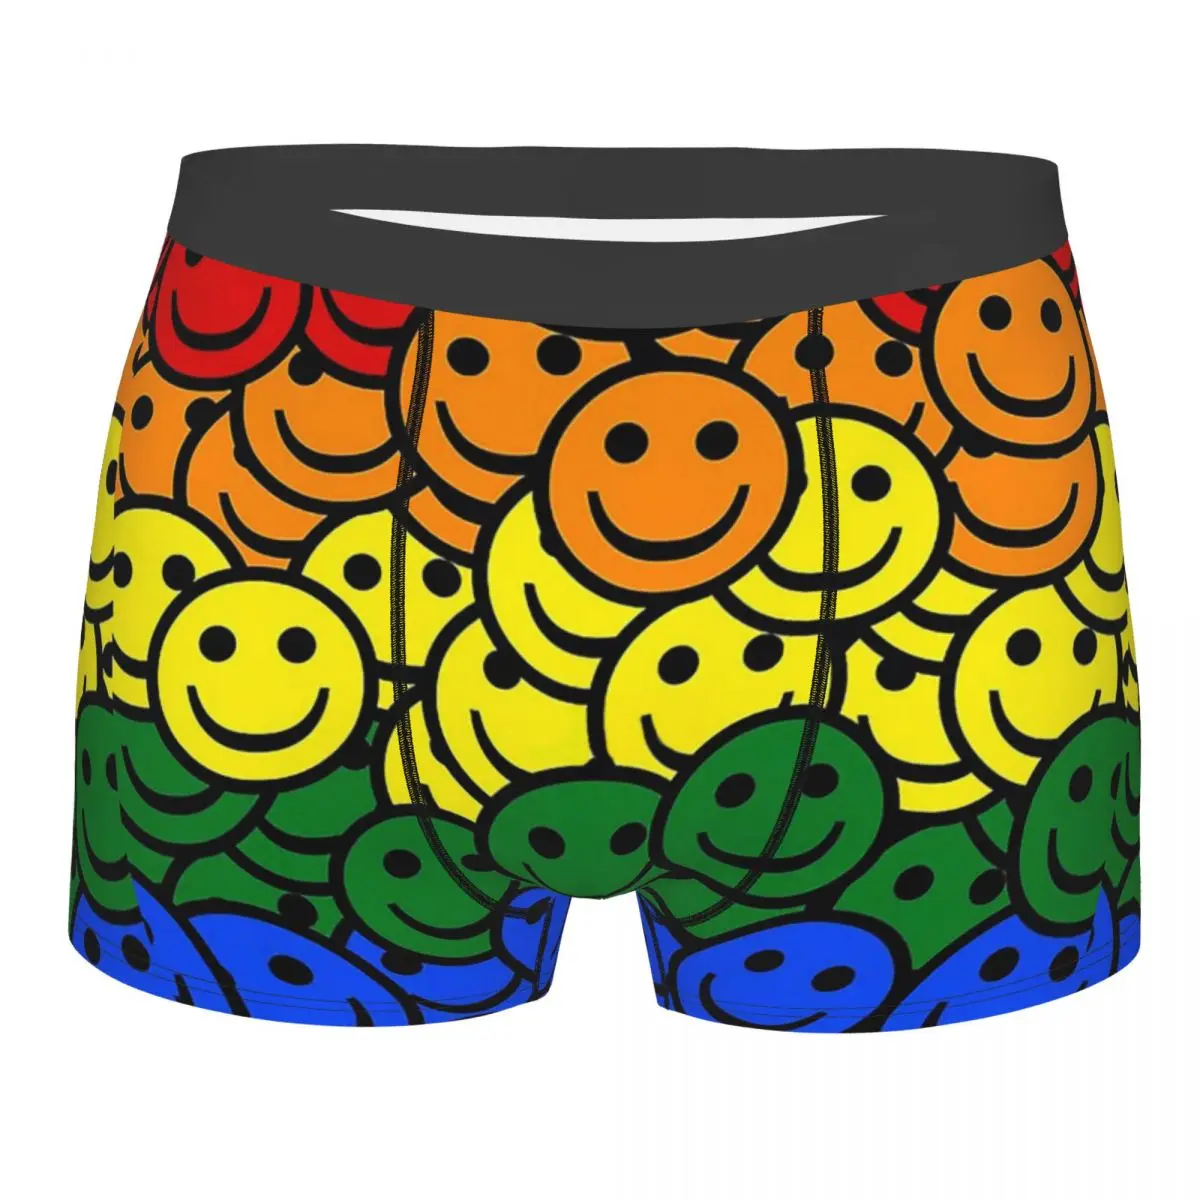 

Smile Gay Pride Man Underwear Rainbow Lgbt Lgbtq Lesbian Queer Boxer Shorts Panties Funny Soft Underpants for Homme Plus Size